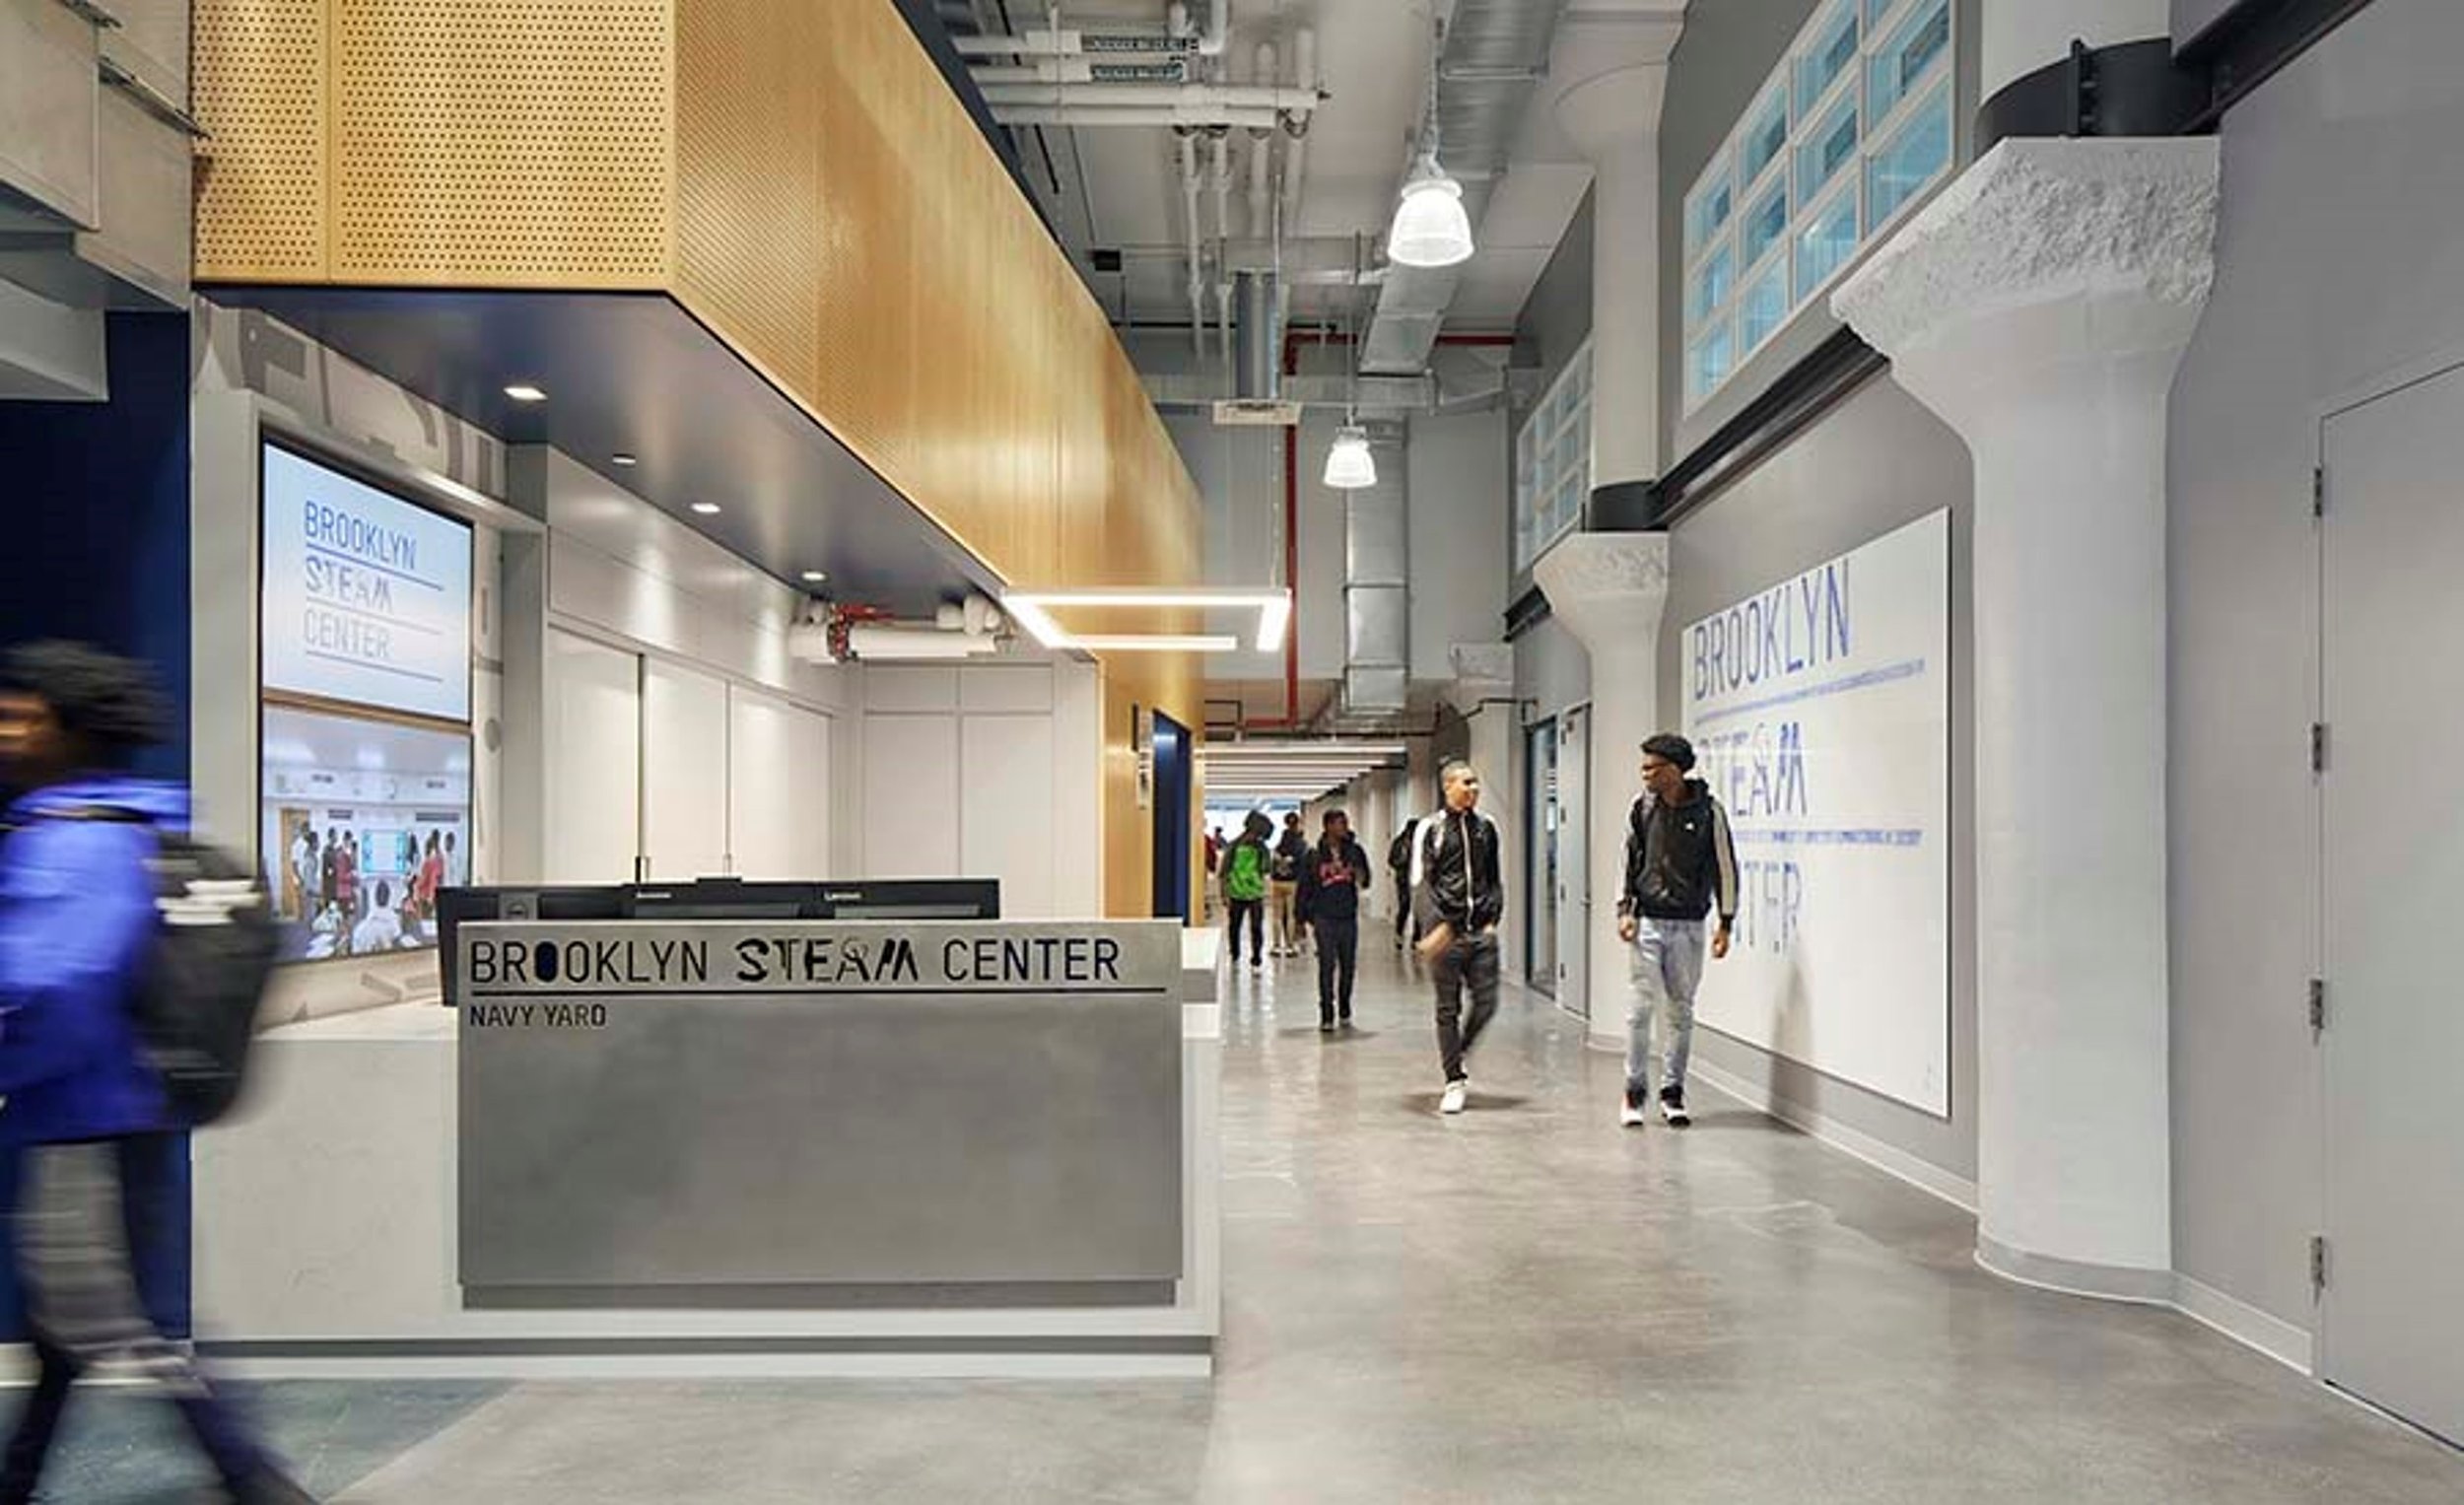 A photo of the Brooklyn steam center building lobby/entrance showing the front desk with the center’s name on it with people walking the hallway. Courtesy of the Brooklyn Navy Yard Development Corporation.